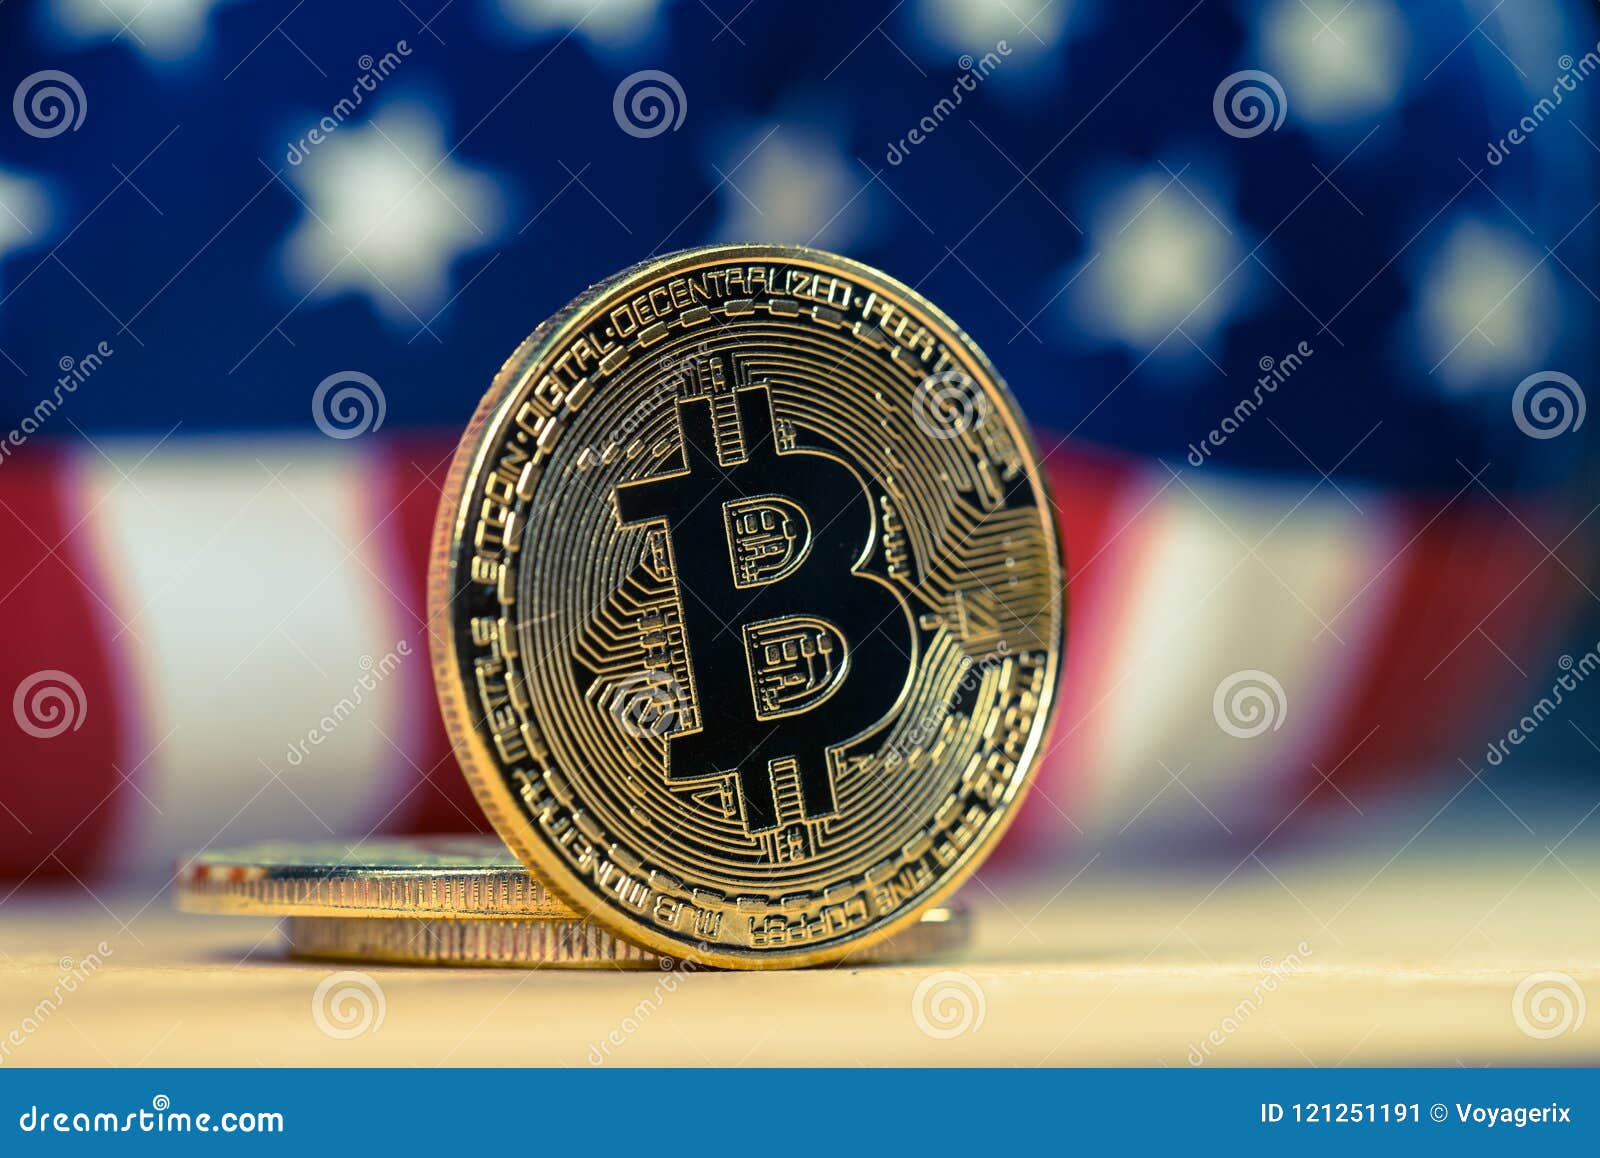 Bitcoin crypocurrency stock image. Image of cryptocurrency ...